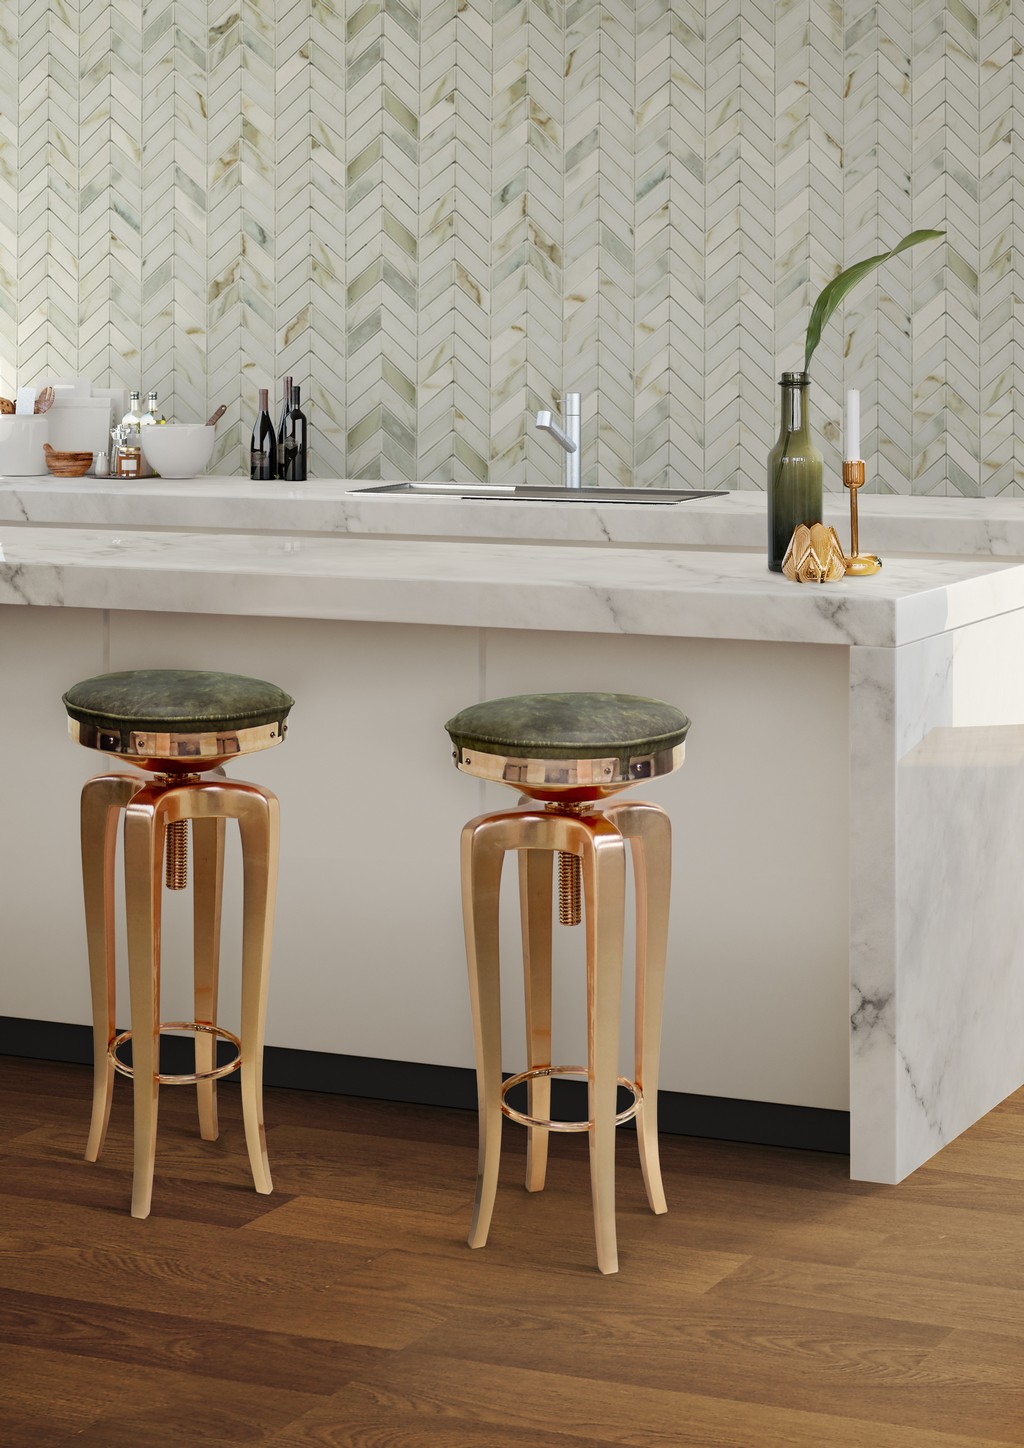 7 Kitchen Counter Stools For Small Places, Small Base Breakfast Bar Stools